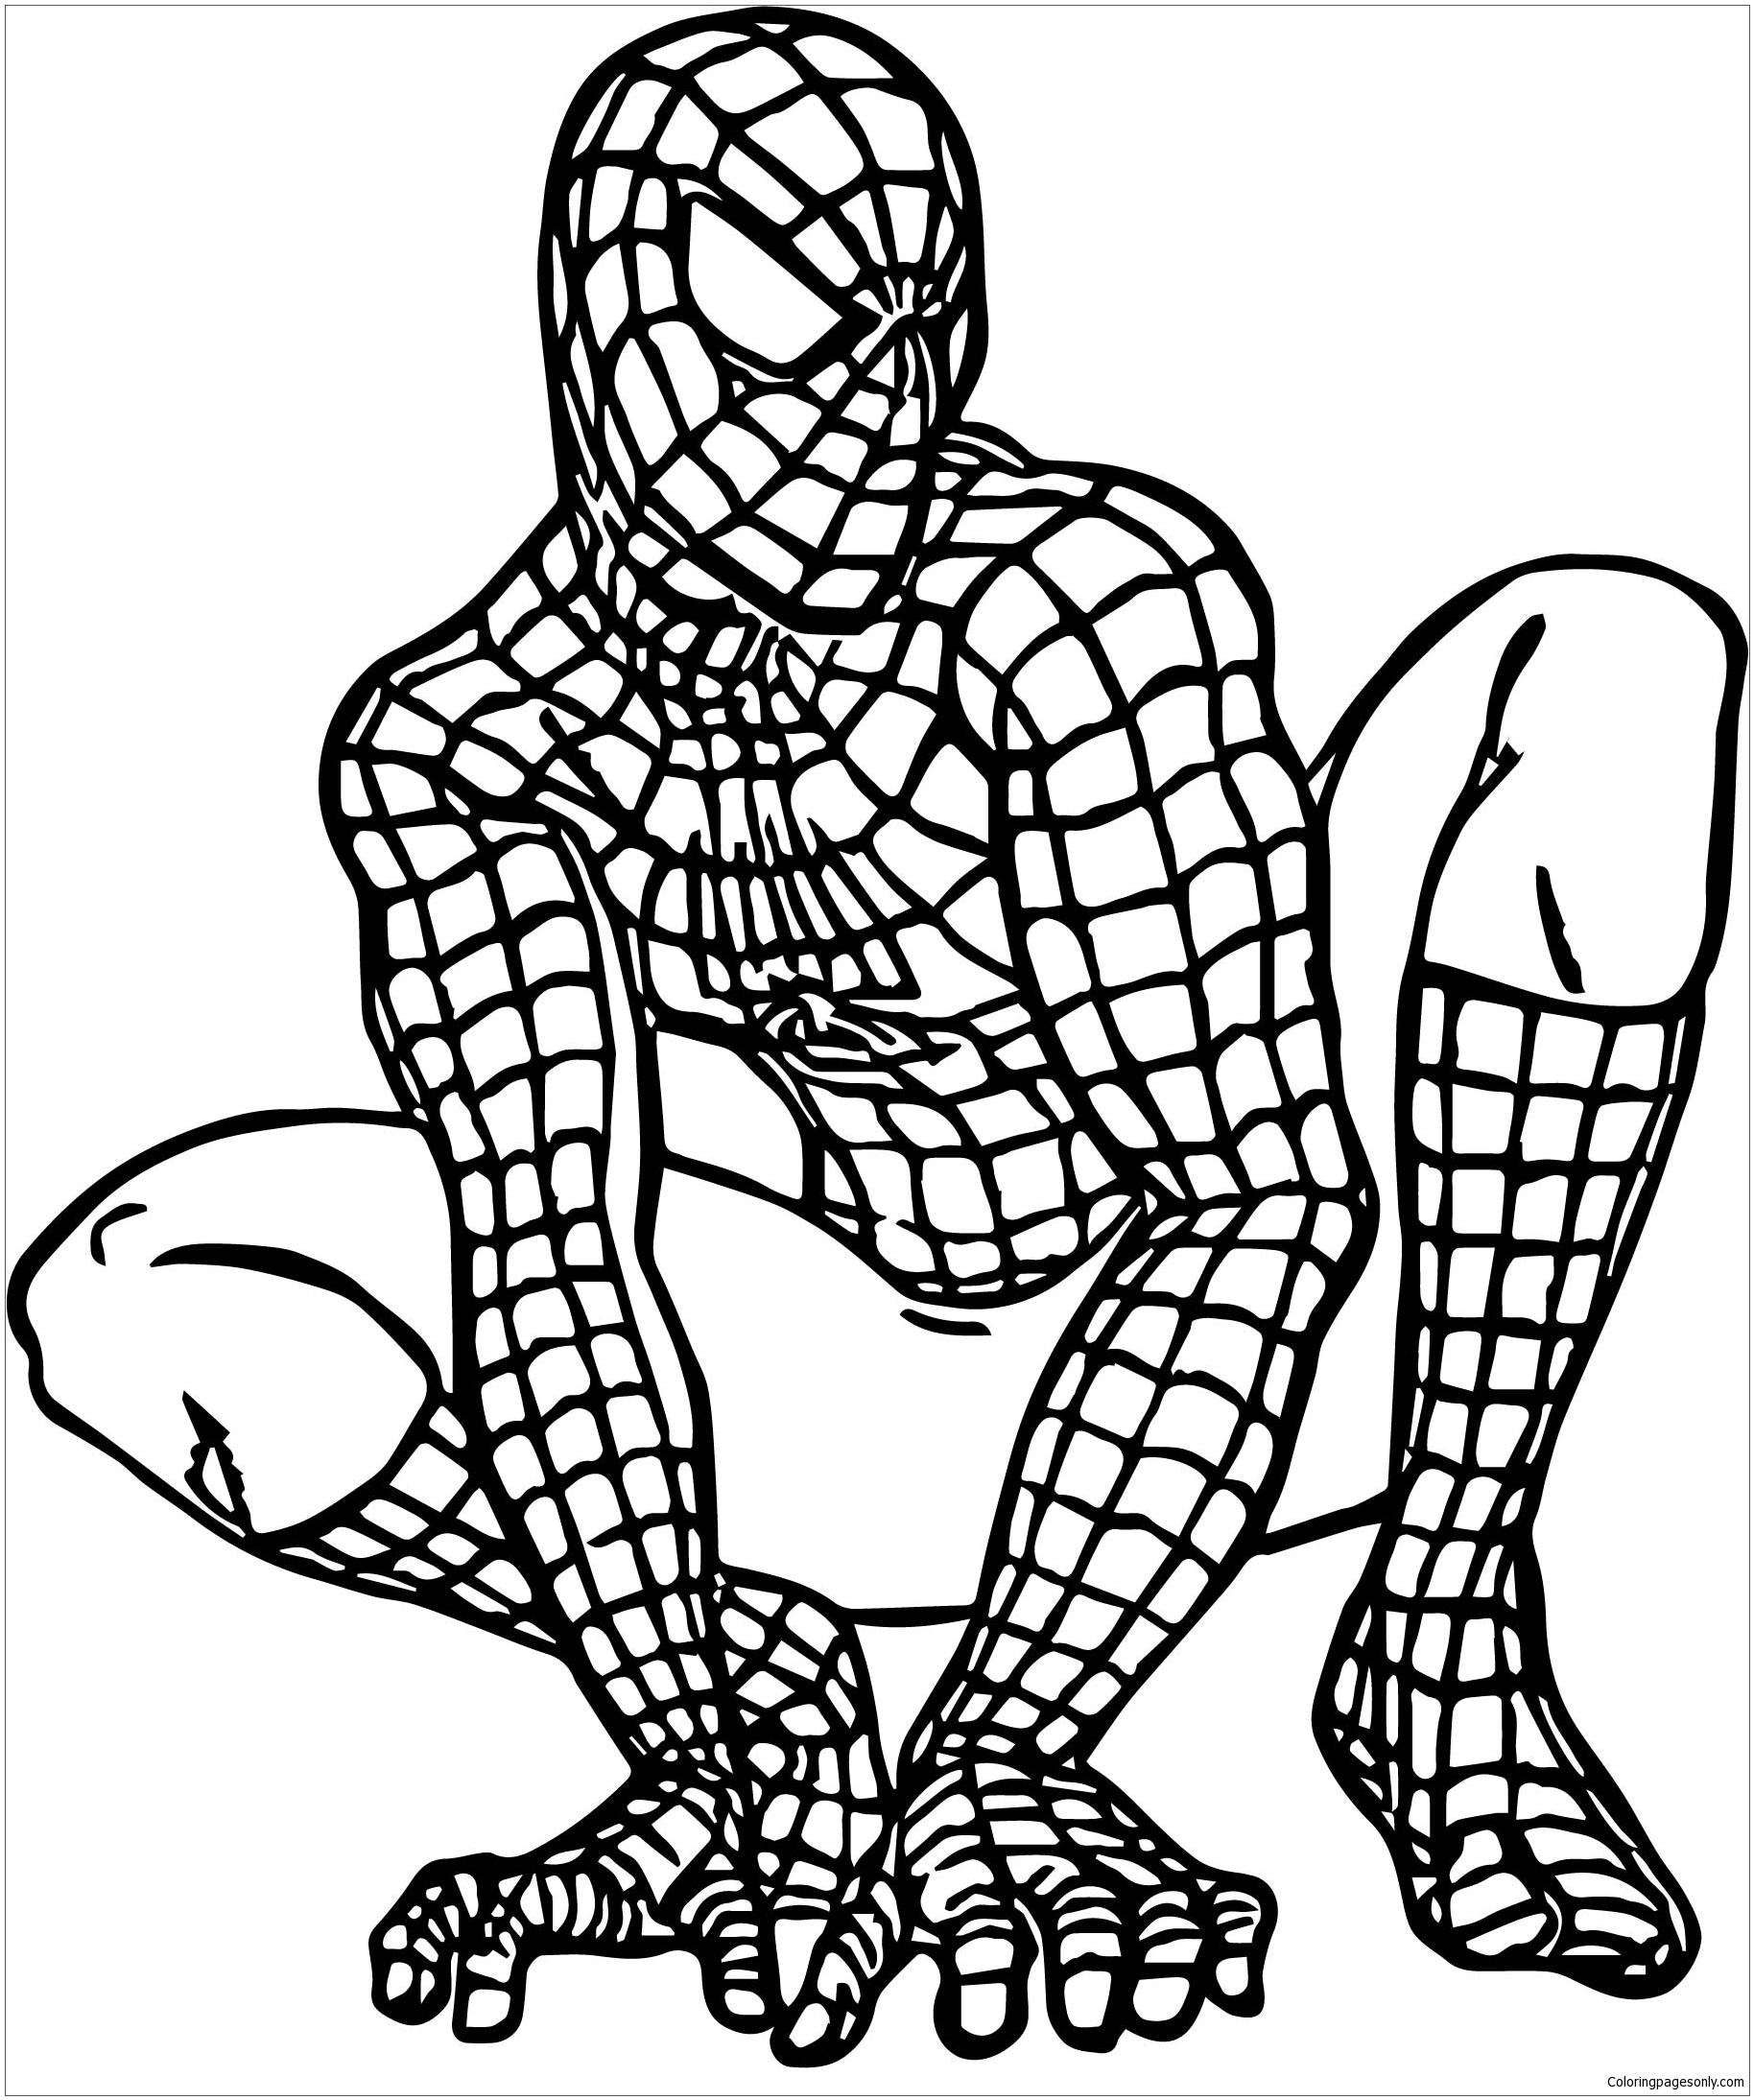 Waiting Spider Man Coloring Page - Free Coloring Pages Online